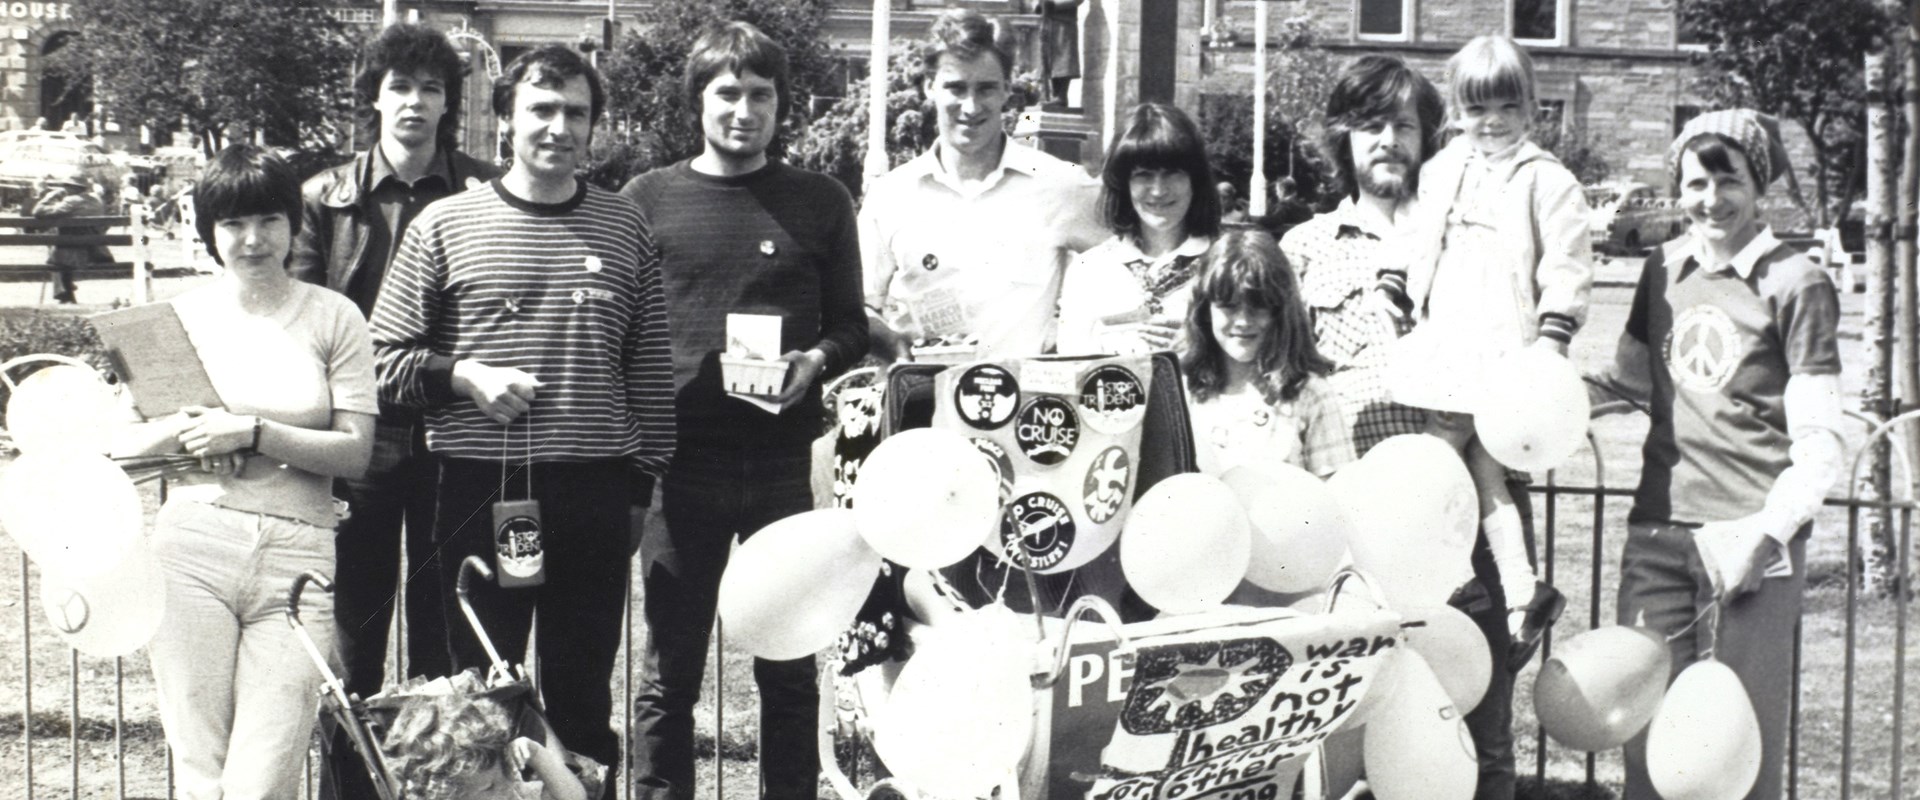 A black and white photo of a group of people standing outside with a cart with balloons.